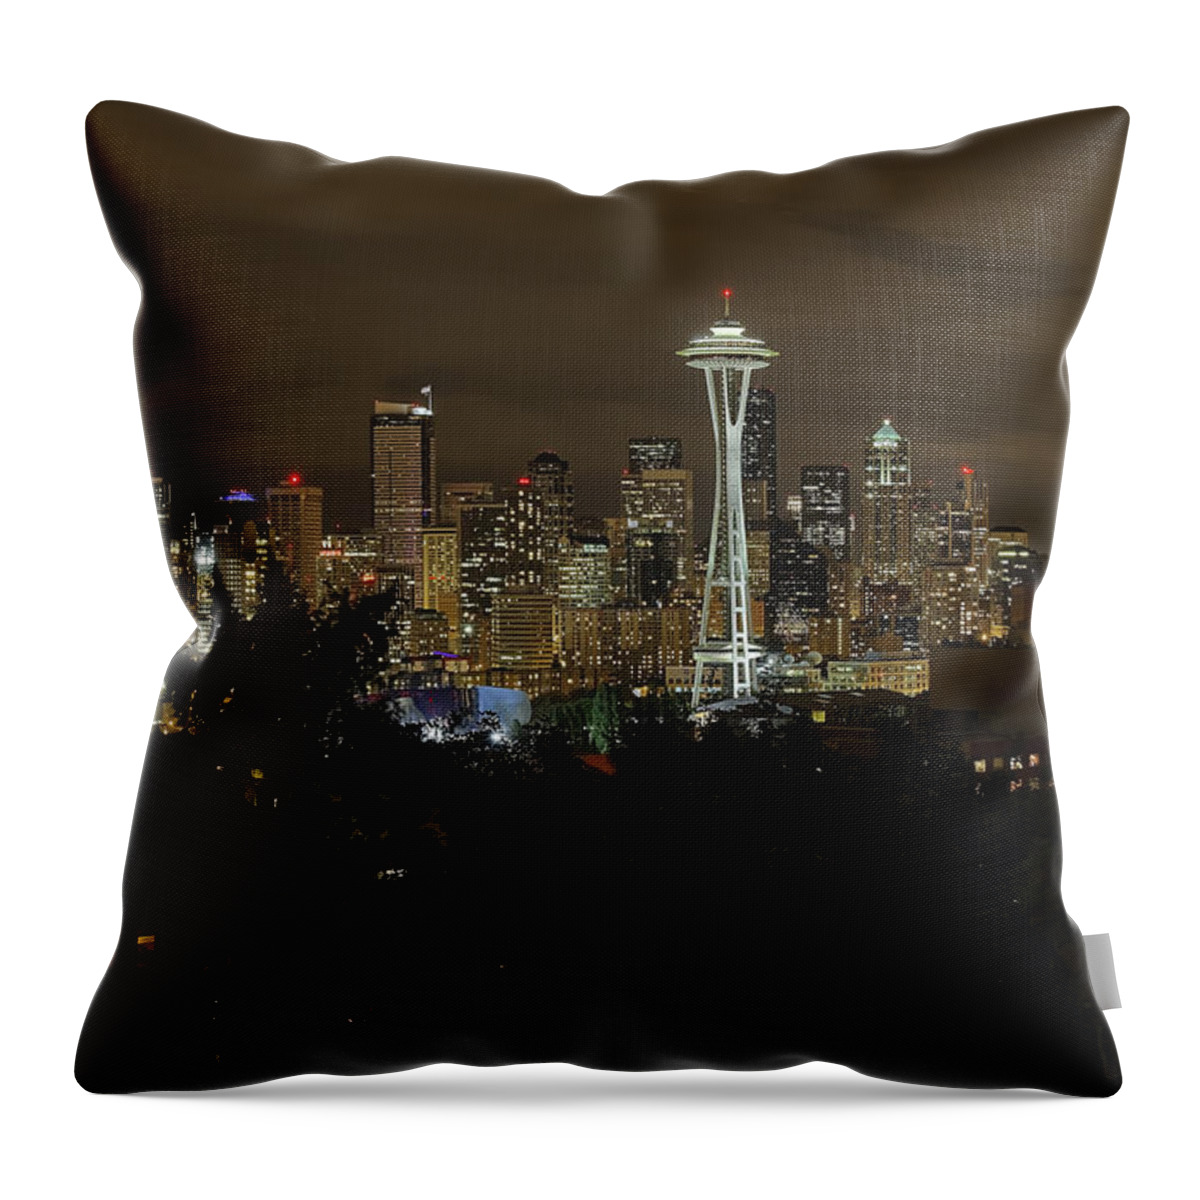 City Of Seattle Throw Pillow featuring the photograph Coffee Town by James Heckt